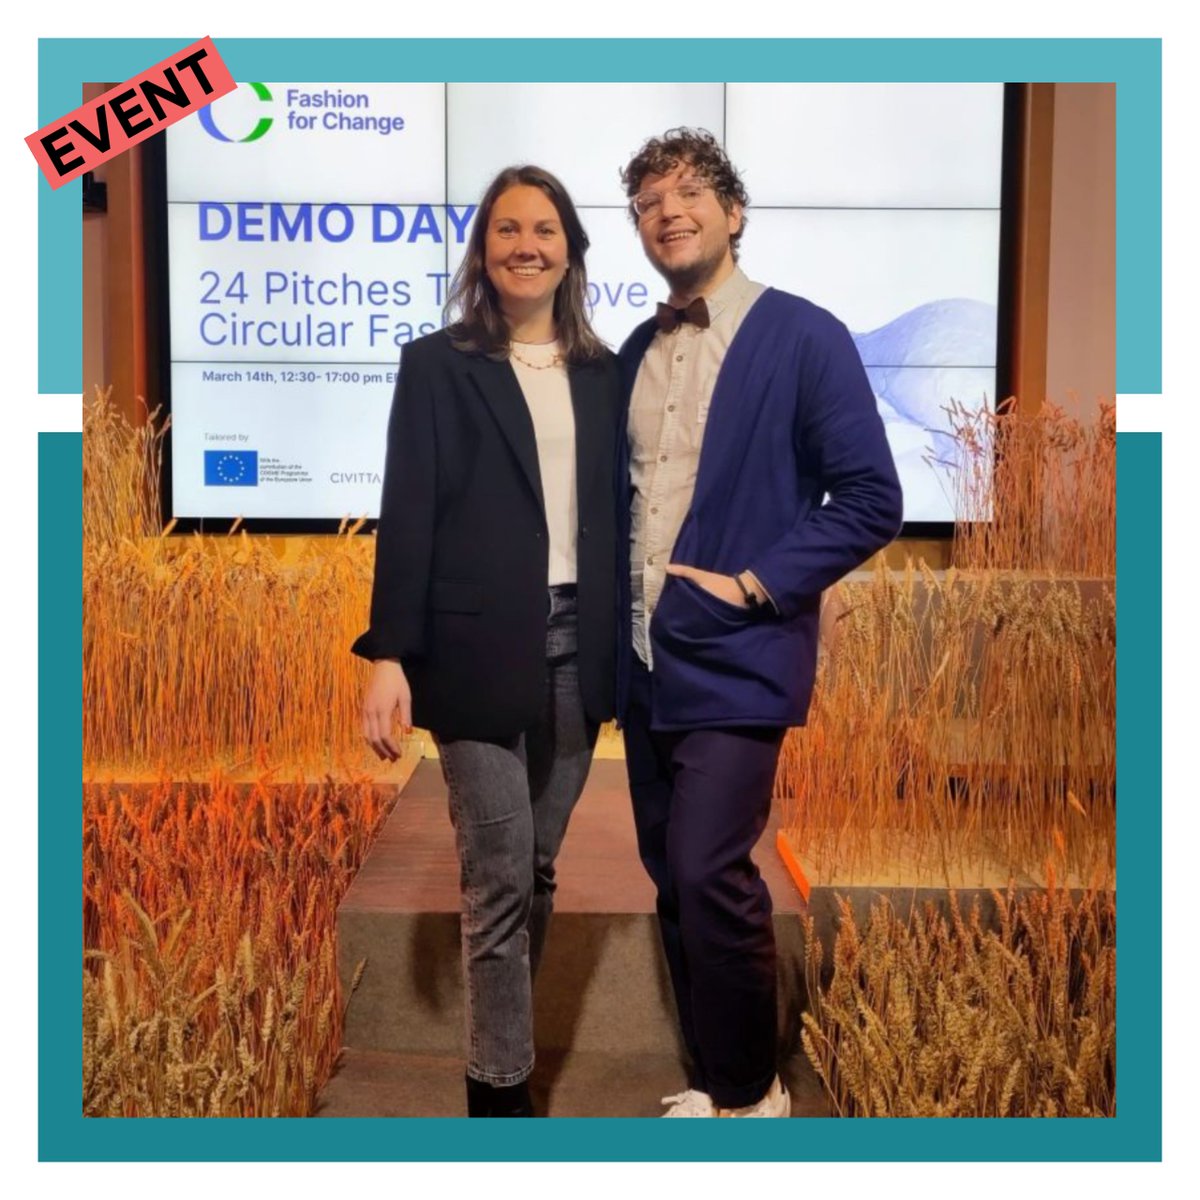 Check out our blog article about the Demo Day Pitch of the @FashionForChangeEU #accelerator program where we had the chance to pitch our collaboration with #textracer and meet exciting #textile #startups, #fairfashion experts, and investors. 💚🤝
atlat.de/blog